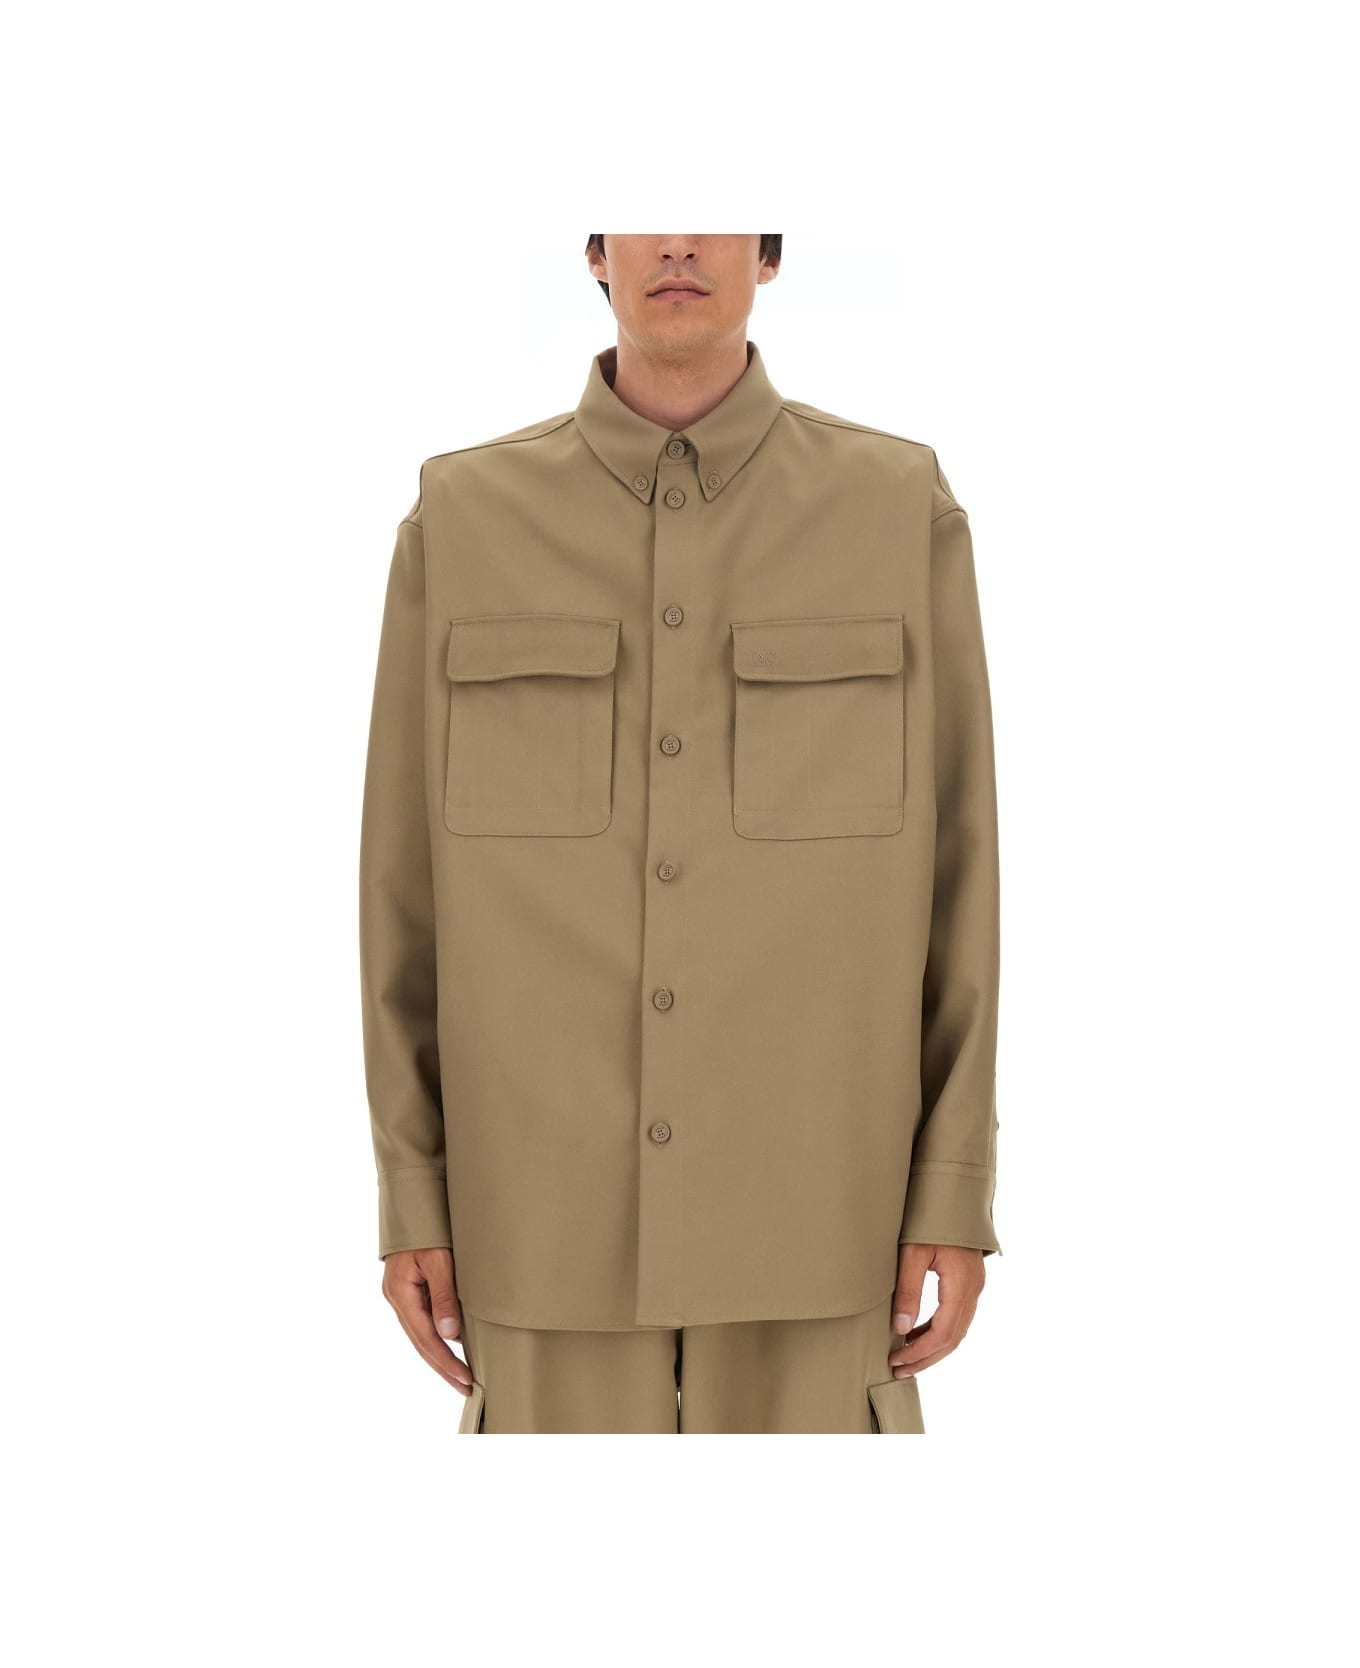 Off-White Oversize Fit Shirt - BEIGE